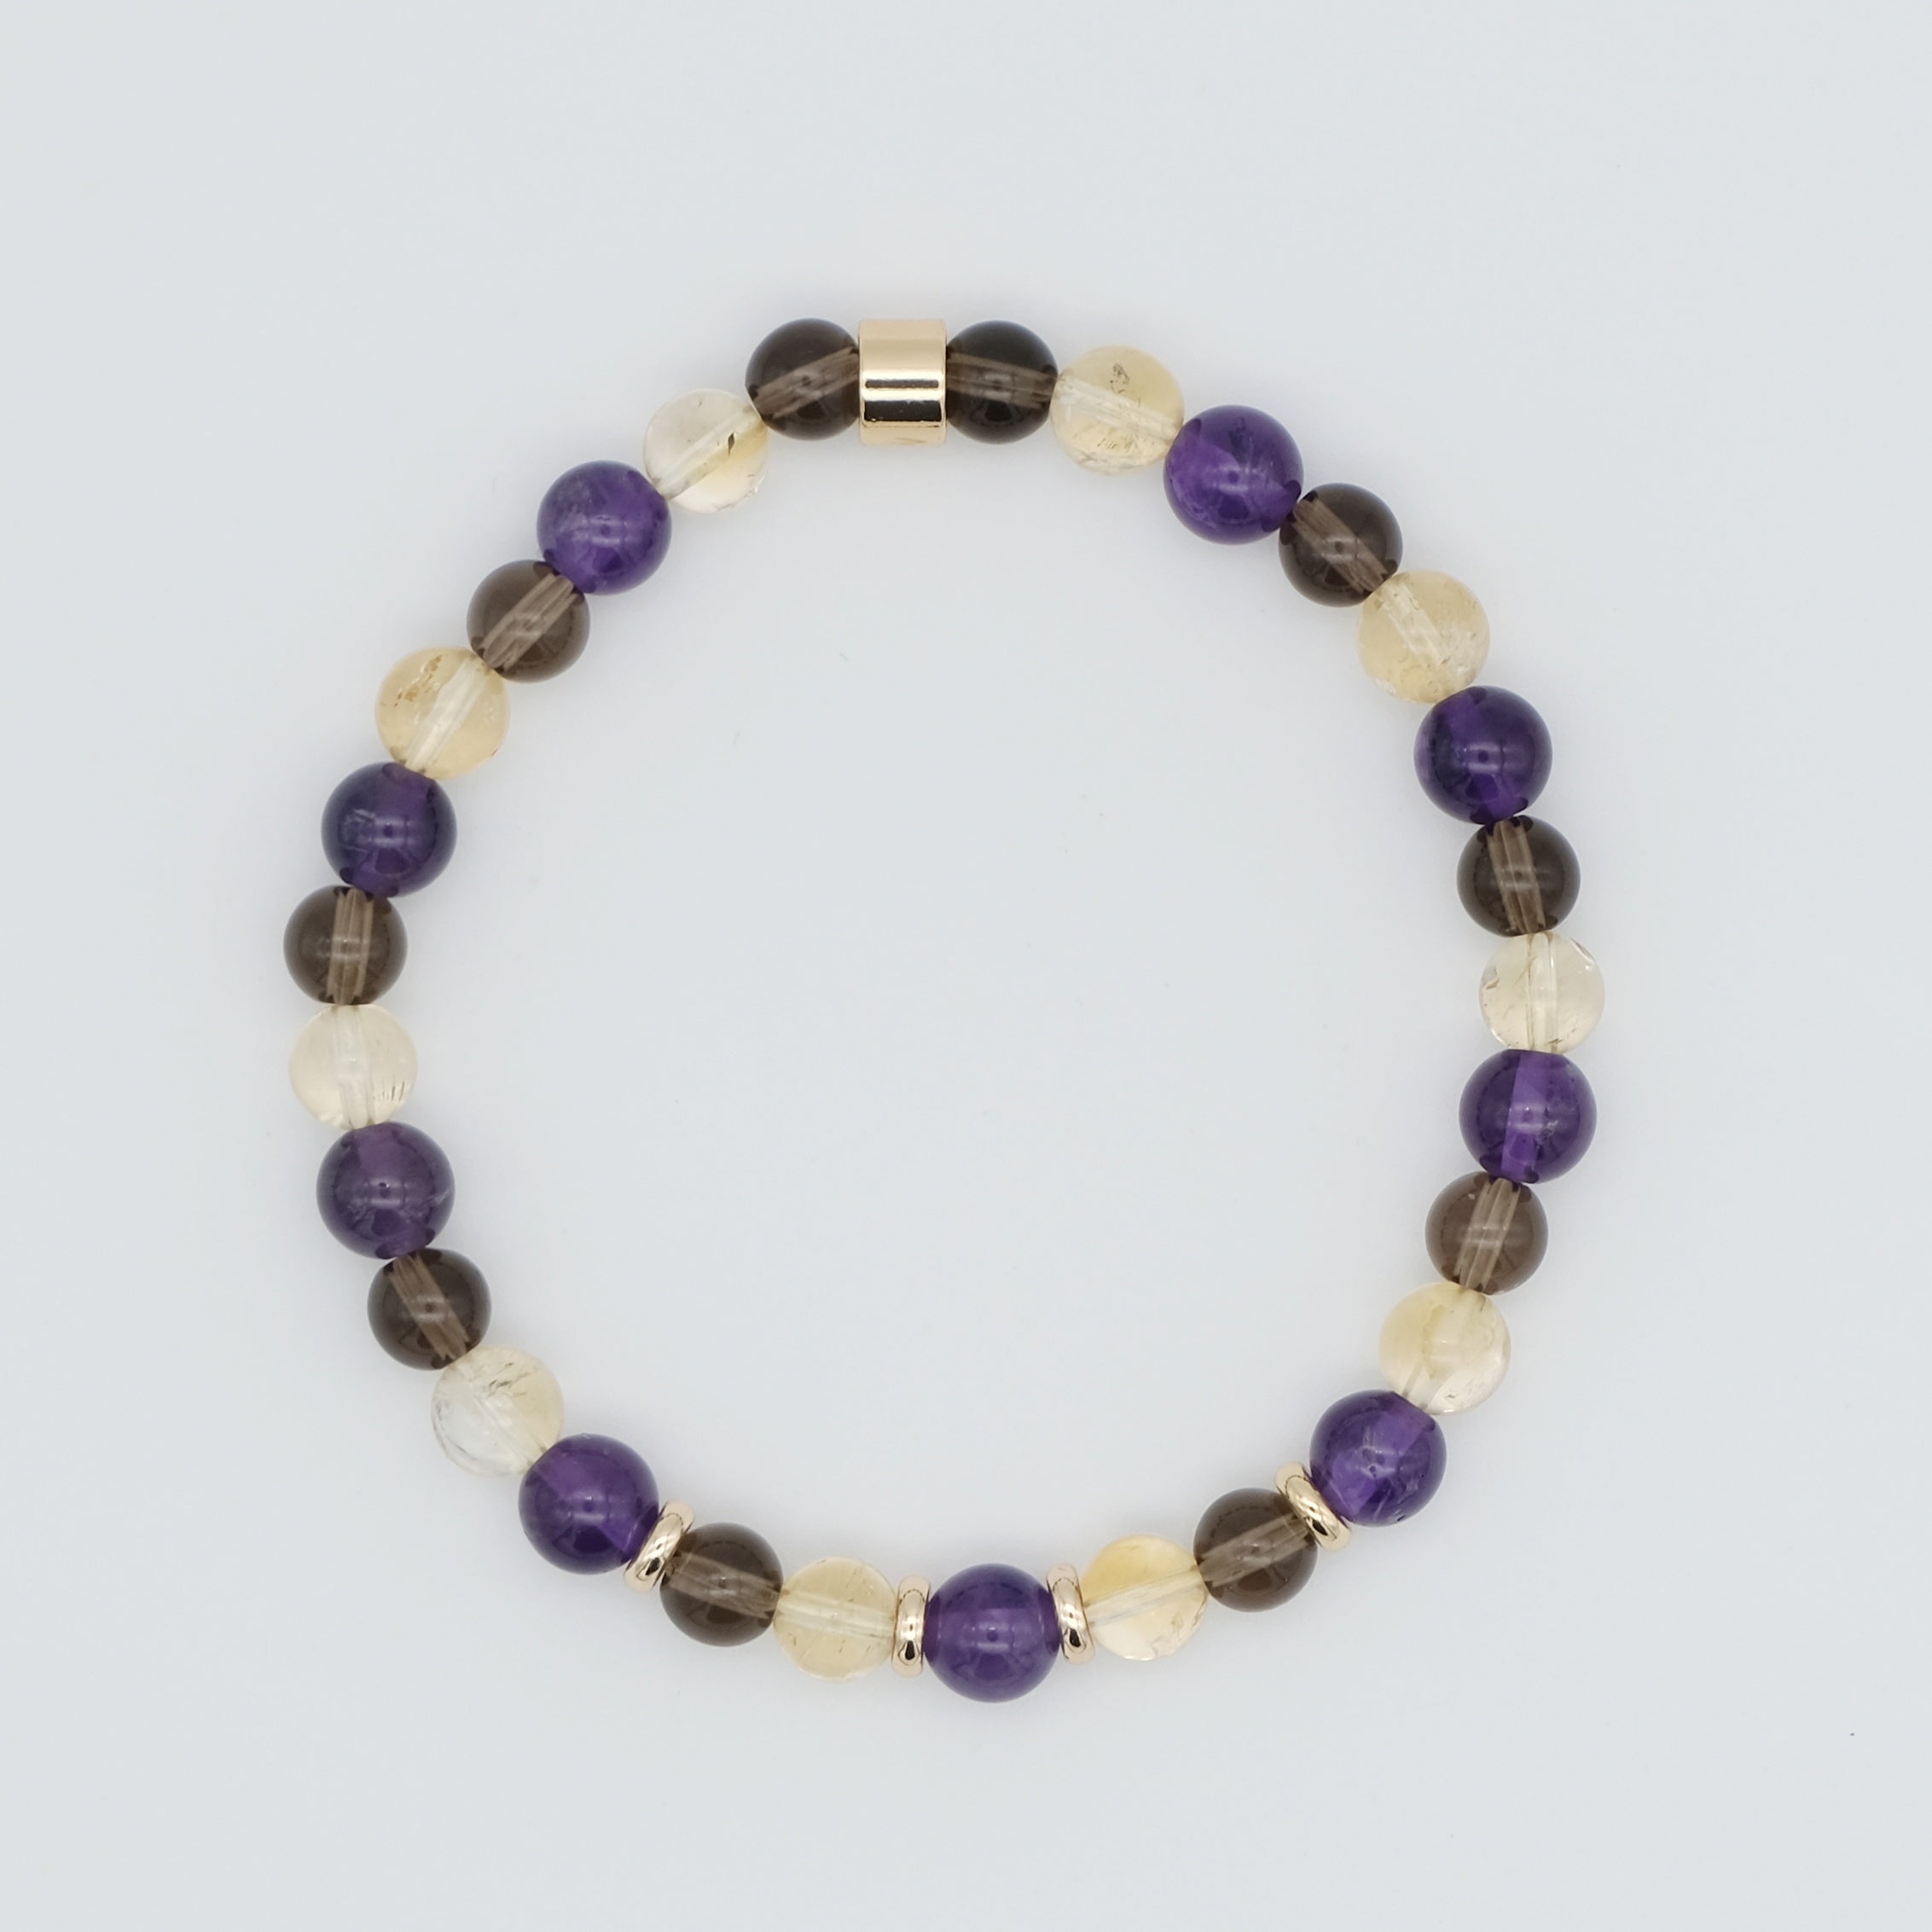 An Amethyst, citrine and smoky quartz gemstone bracelet in 6mm beads with gold accessories from above